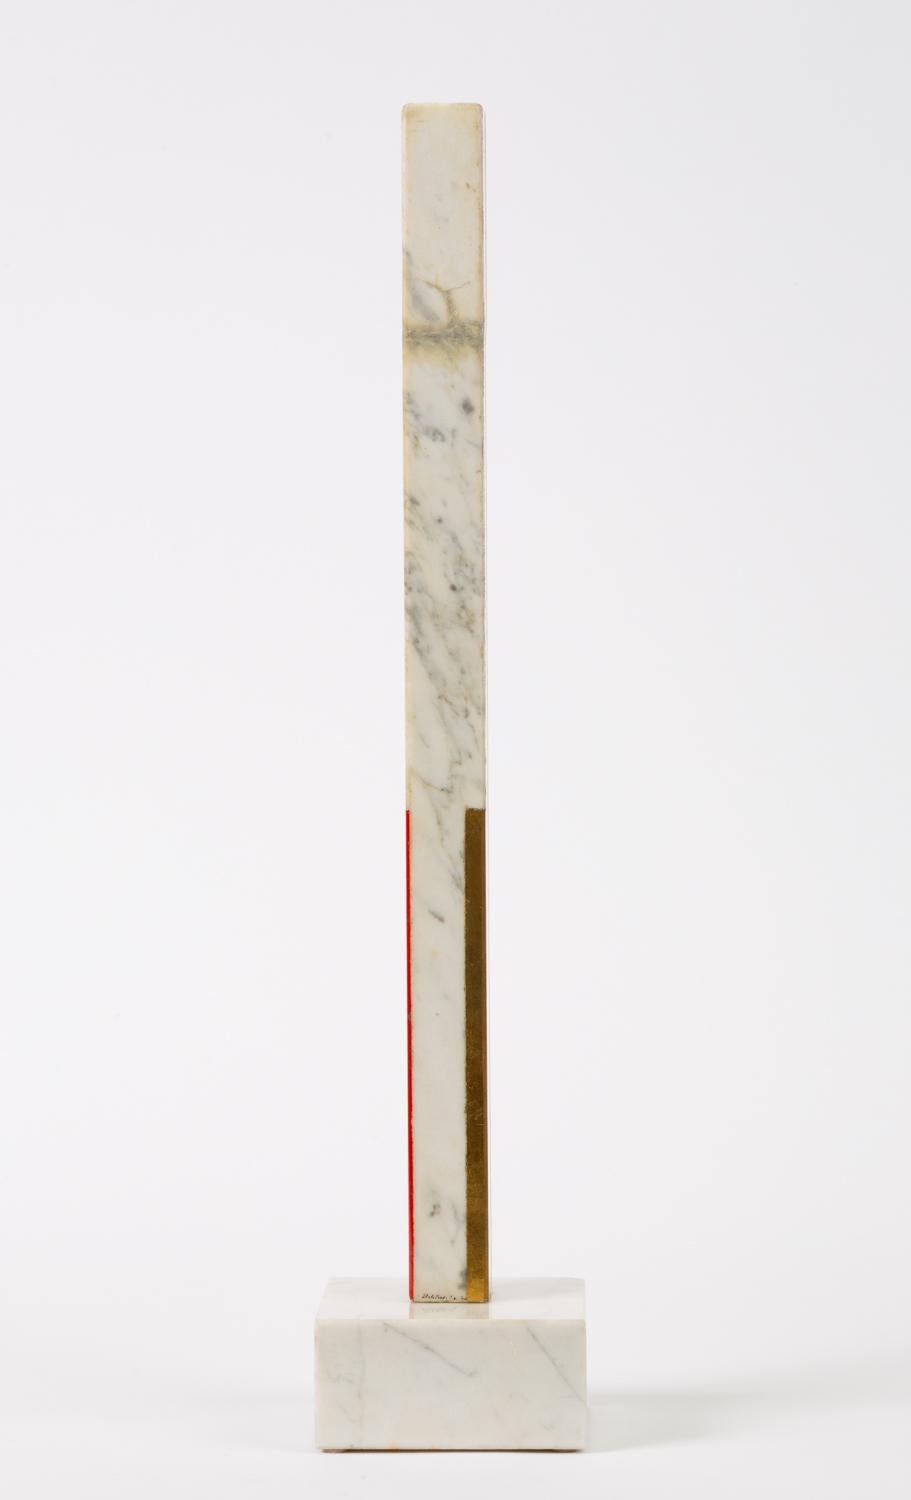 American Marble Sculpture by Ilya Bolotowsky, “Column #22”